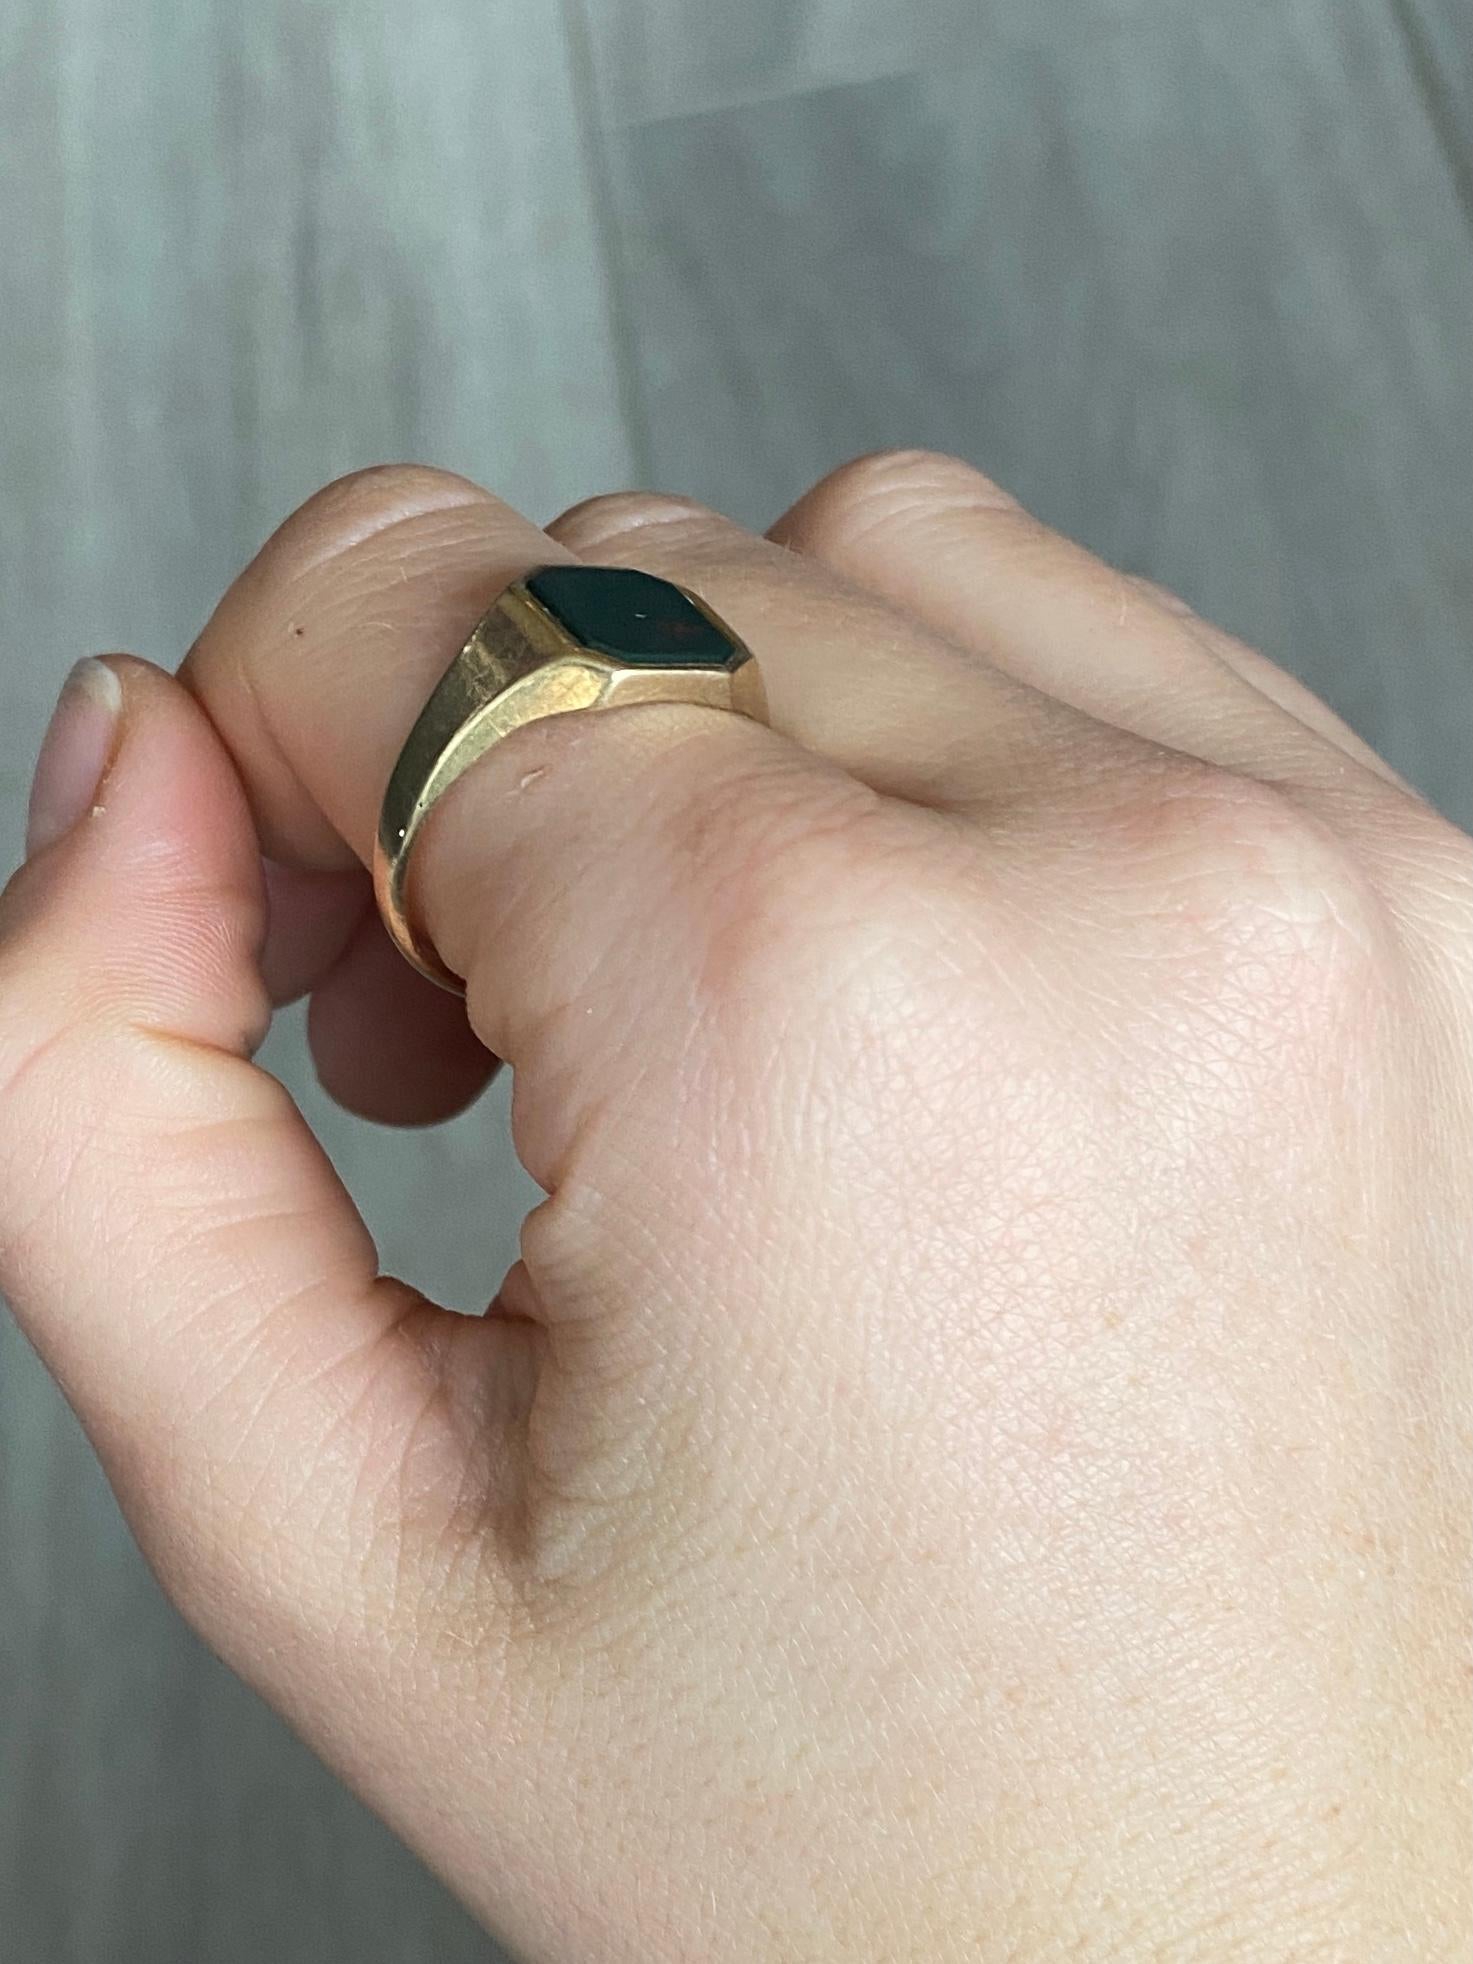 A fine vintage signet ring set with a superb flat cut bloodstone. Modelled in 9 carat yellow gold. Fully hallmarked Chester, 1939 England.

Ring Size: V or 10 1/2 
Stone Dimensions: 10x9mm 

Weight: 4.5g